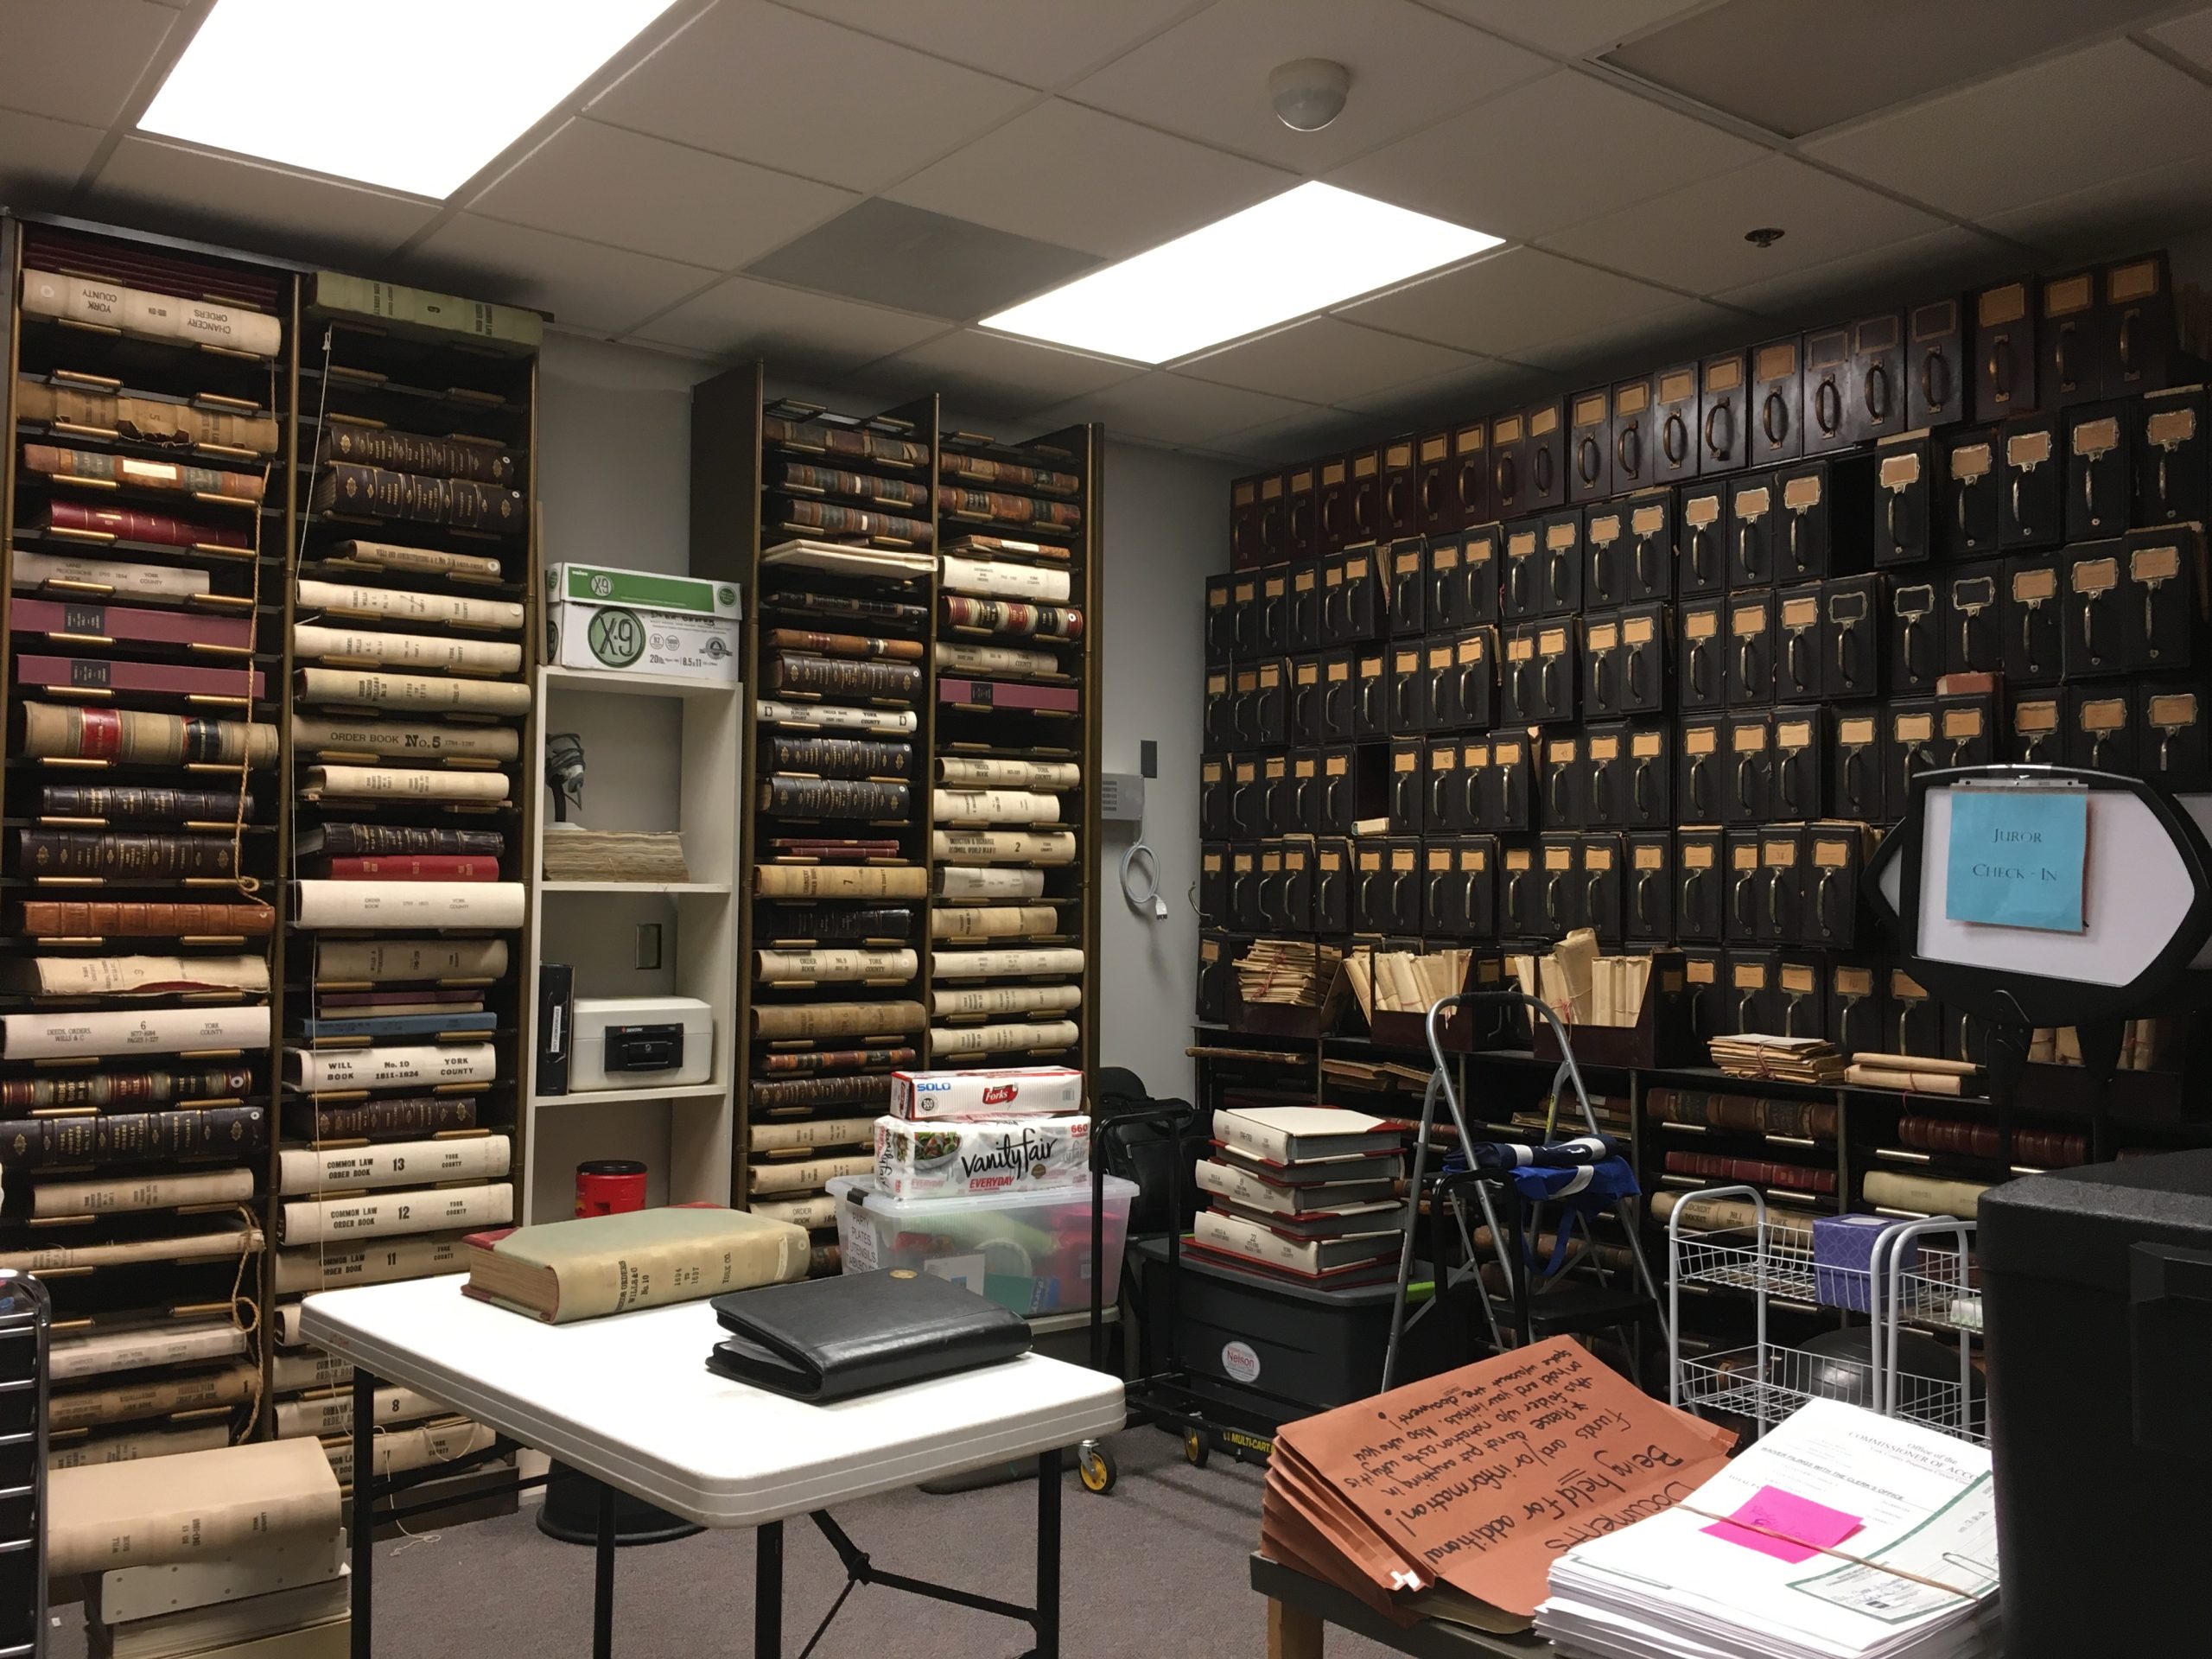 What Do CCRP Archivists Do?